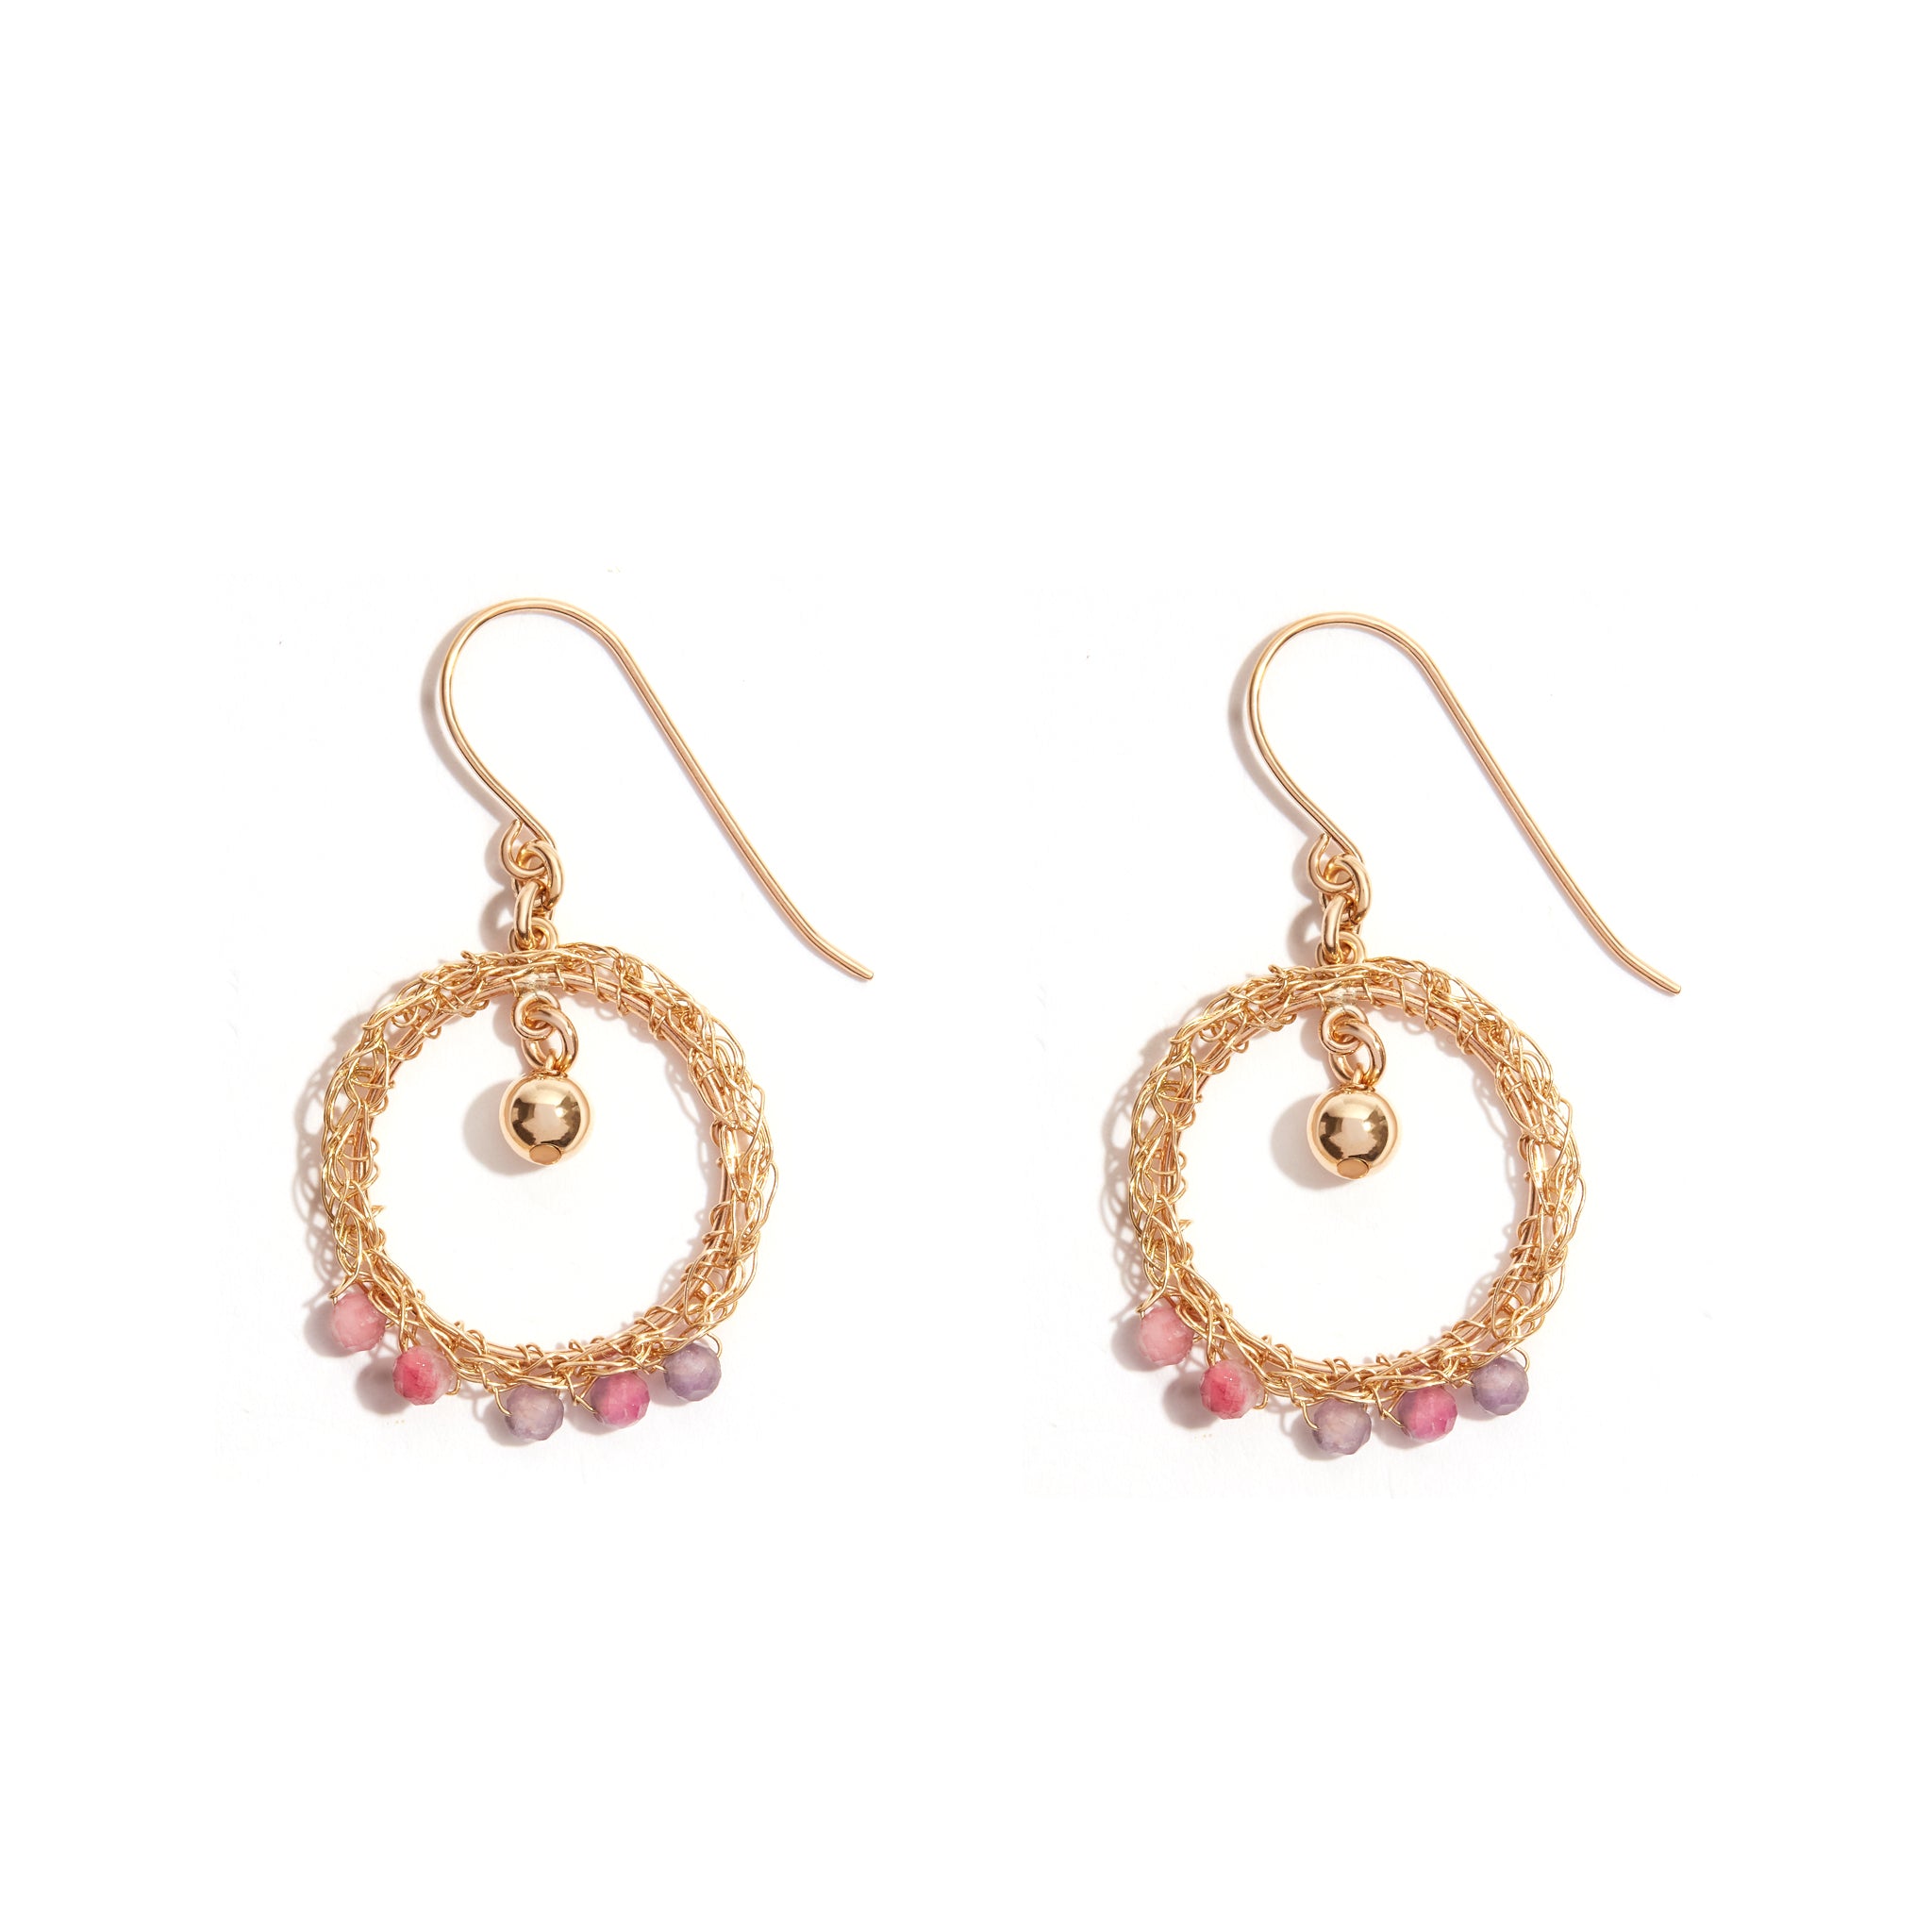 Newest addition to our earring collection! Crafted with meticulous attention to detail and infused with timeless charm. Material: Goldfield. Shape: Round. Design: Features 2 cm crochet loops. Beads: 5 pink tourmaline beads, each measuring 3.5mm